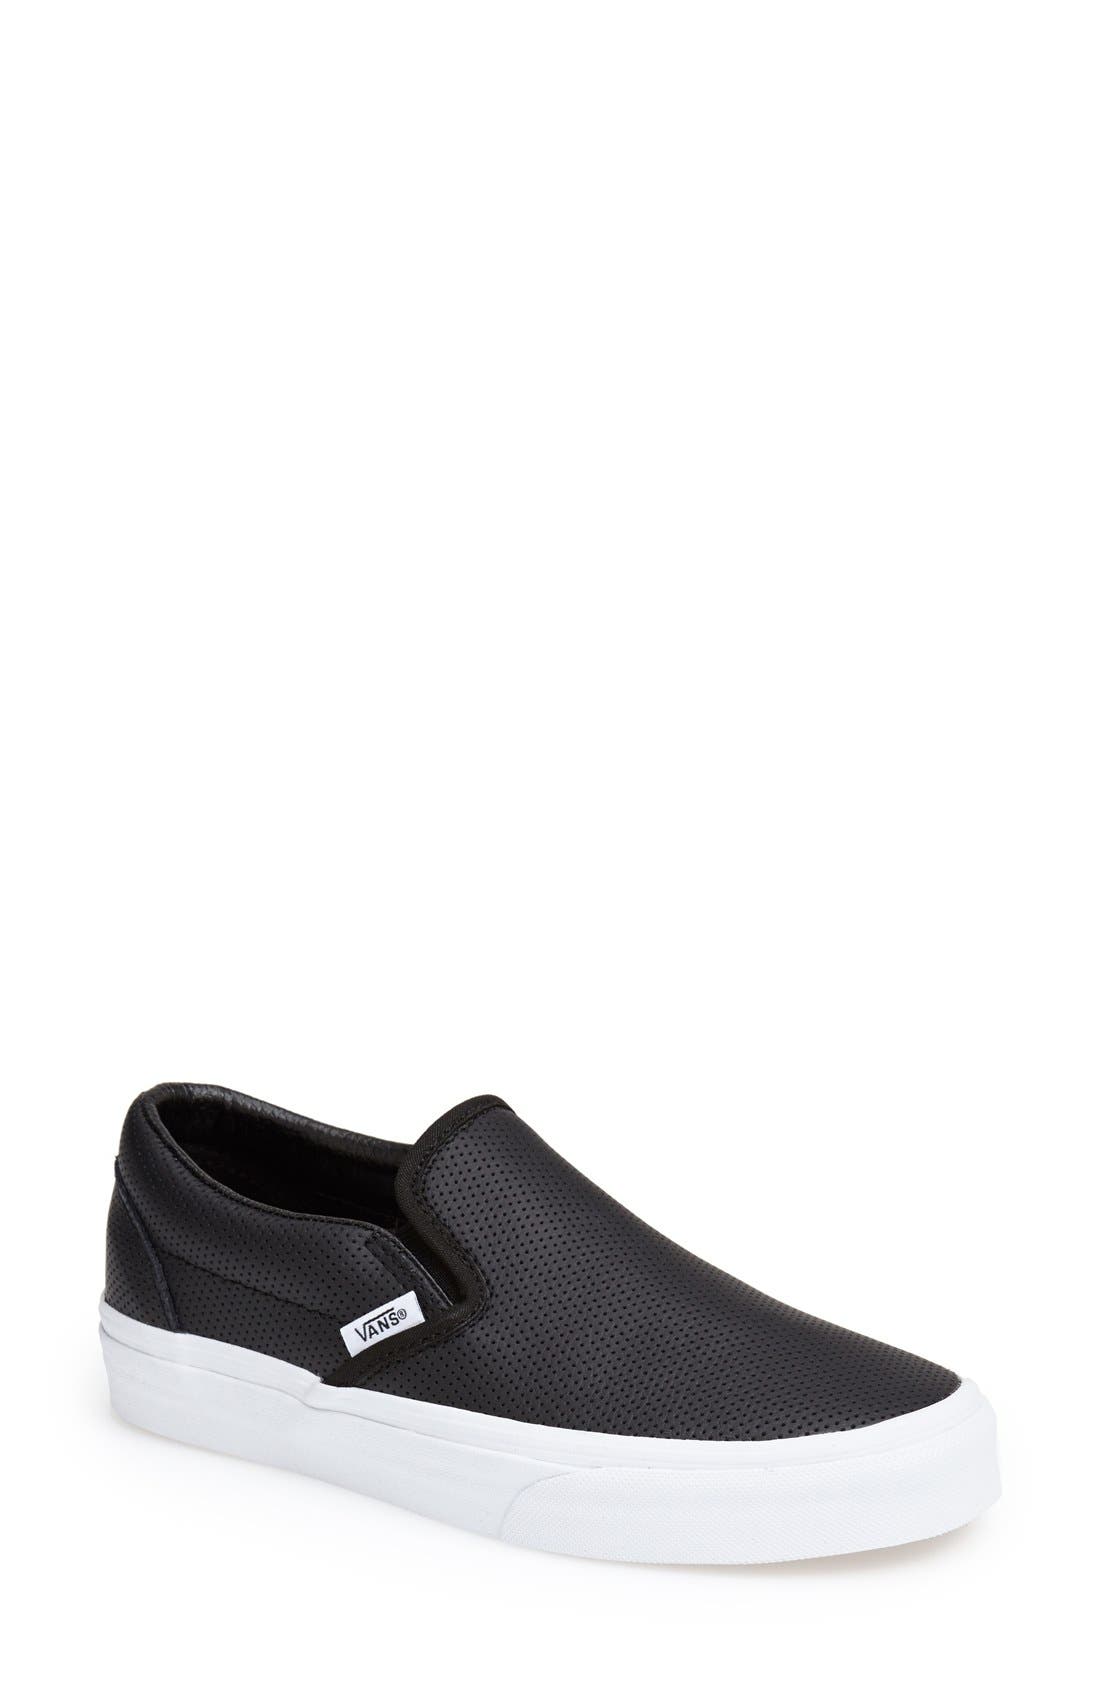 Daniel Hechter Slip-on Sneakers black-silver-colored athletic style Shoes Sneakers Slip-on Sneakers 